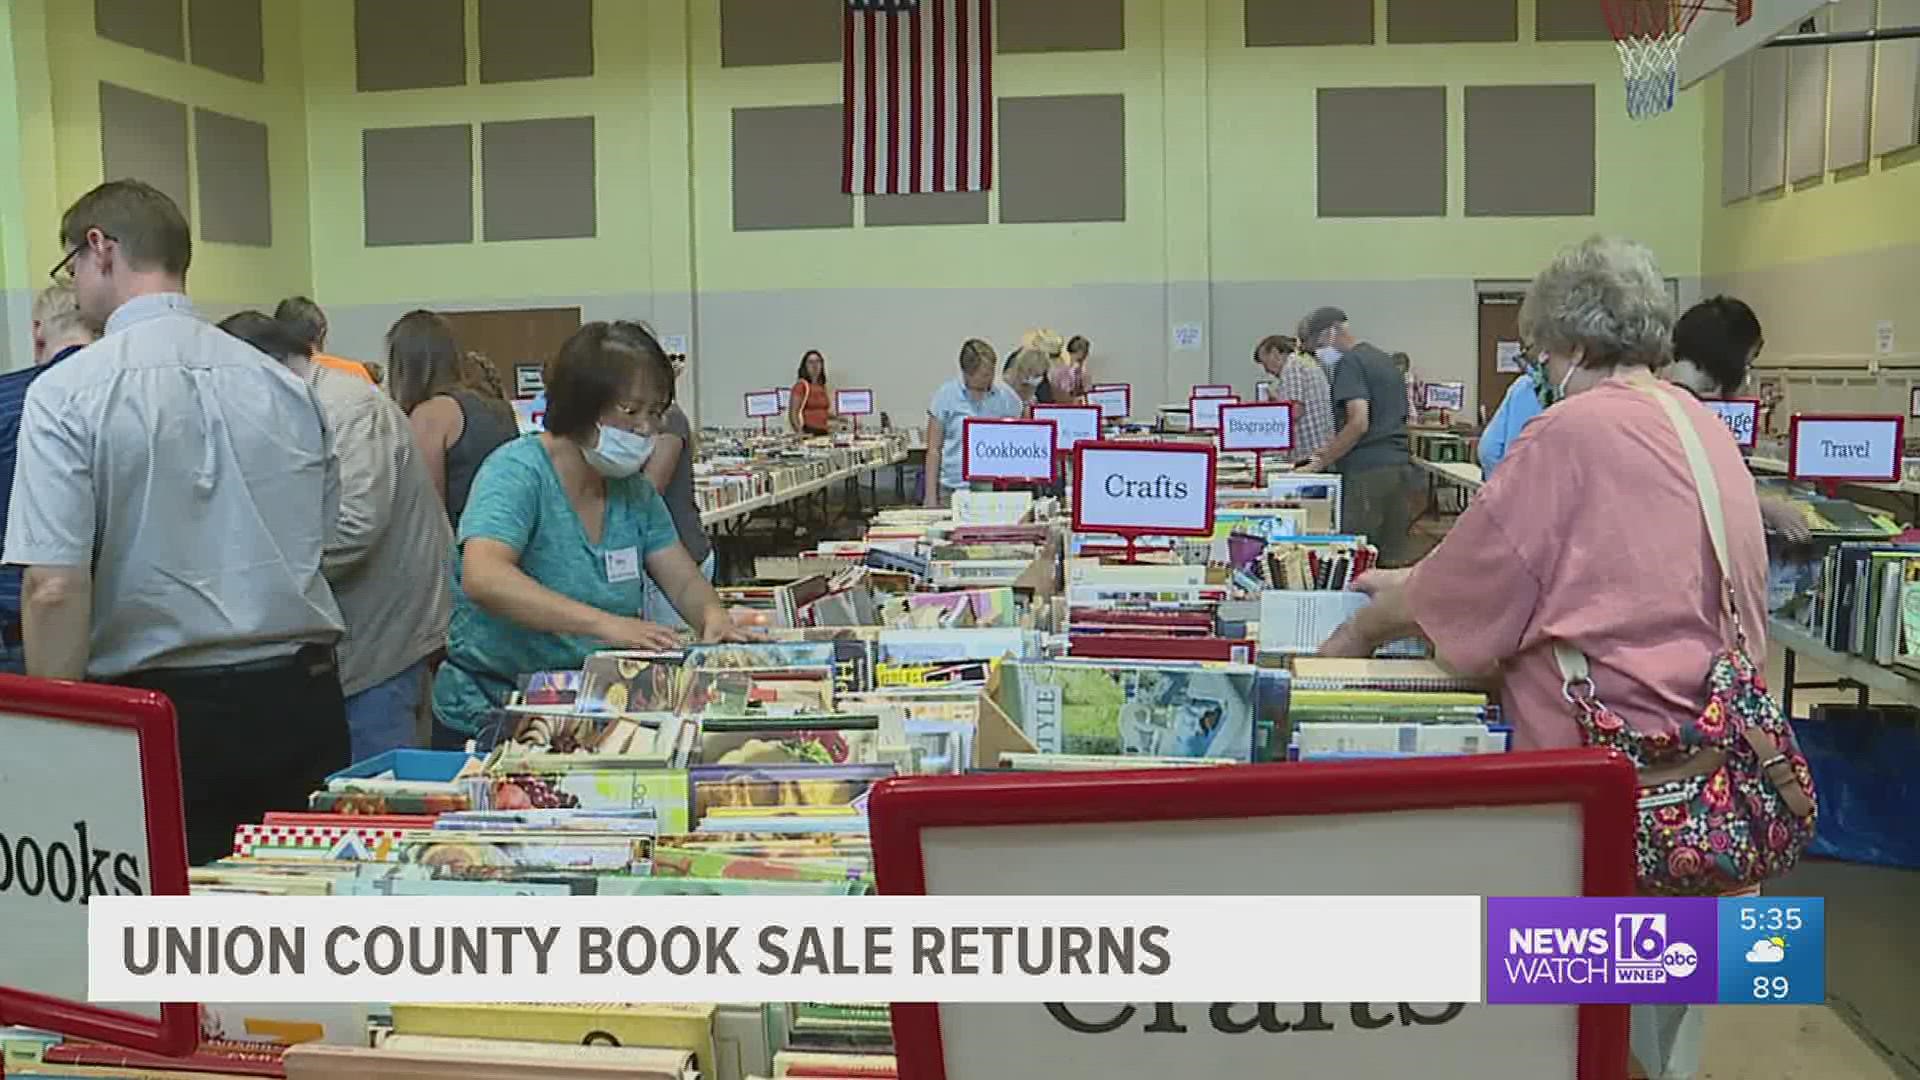 Bookworms are flocking to the Lewisburg area this week as the Public Library for Union County is holding its book sale once again.